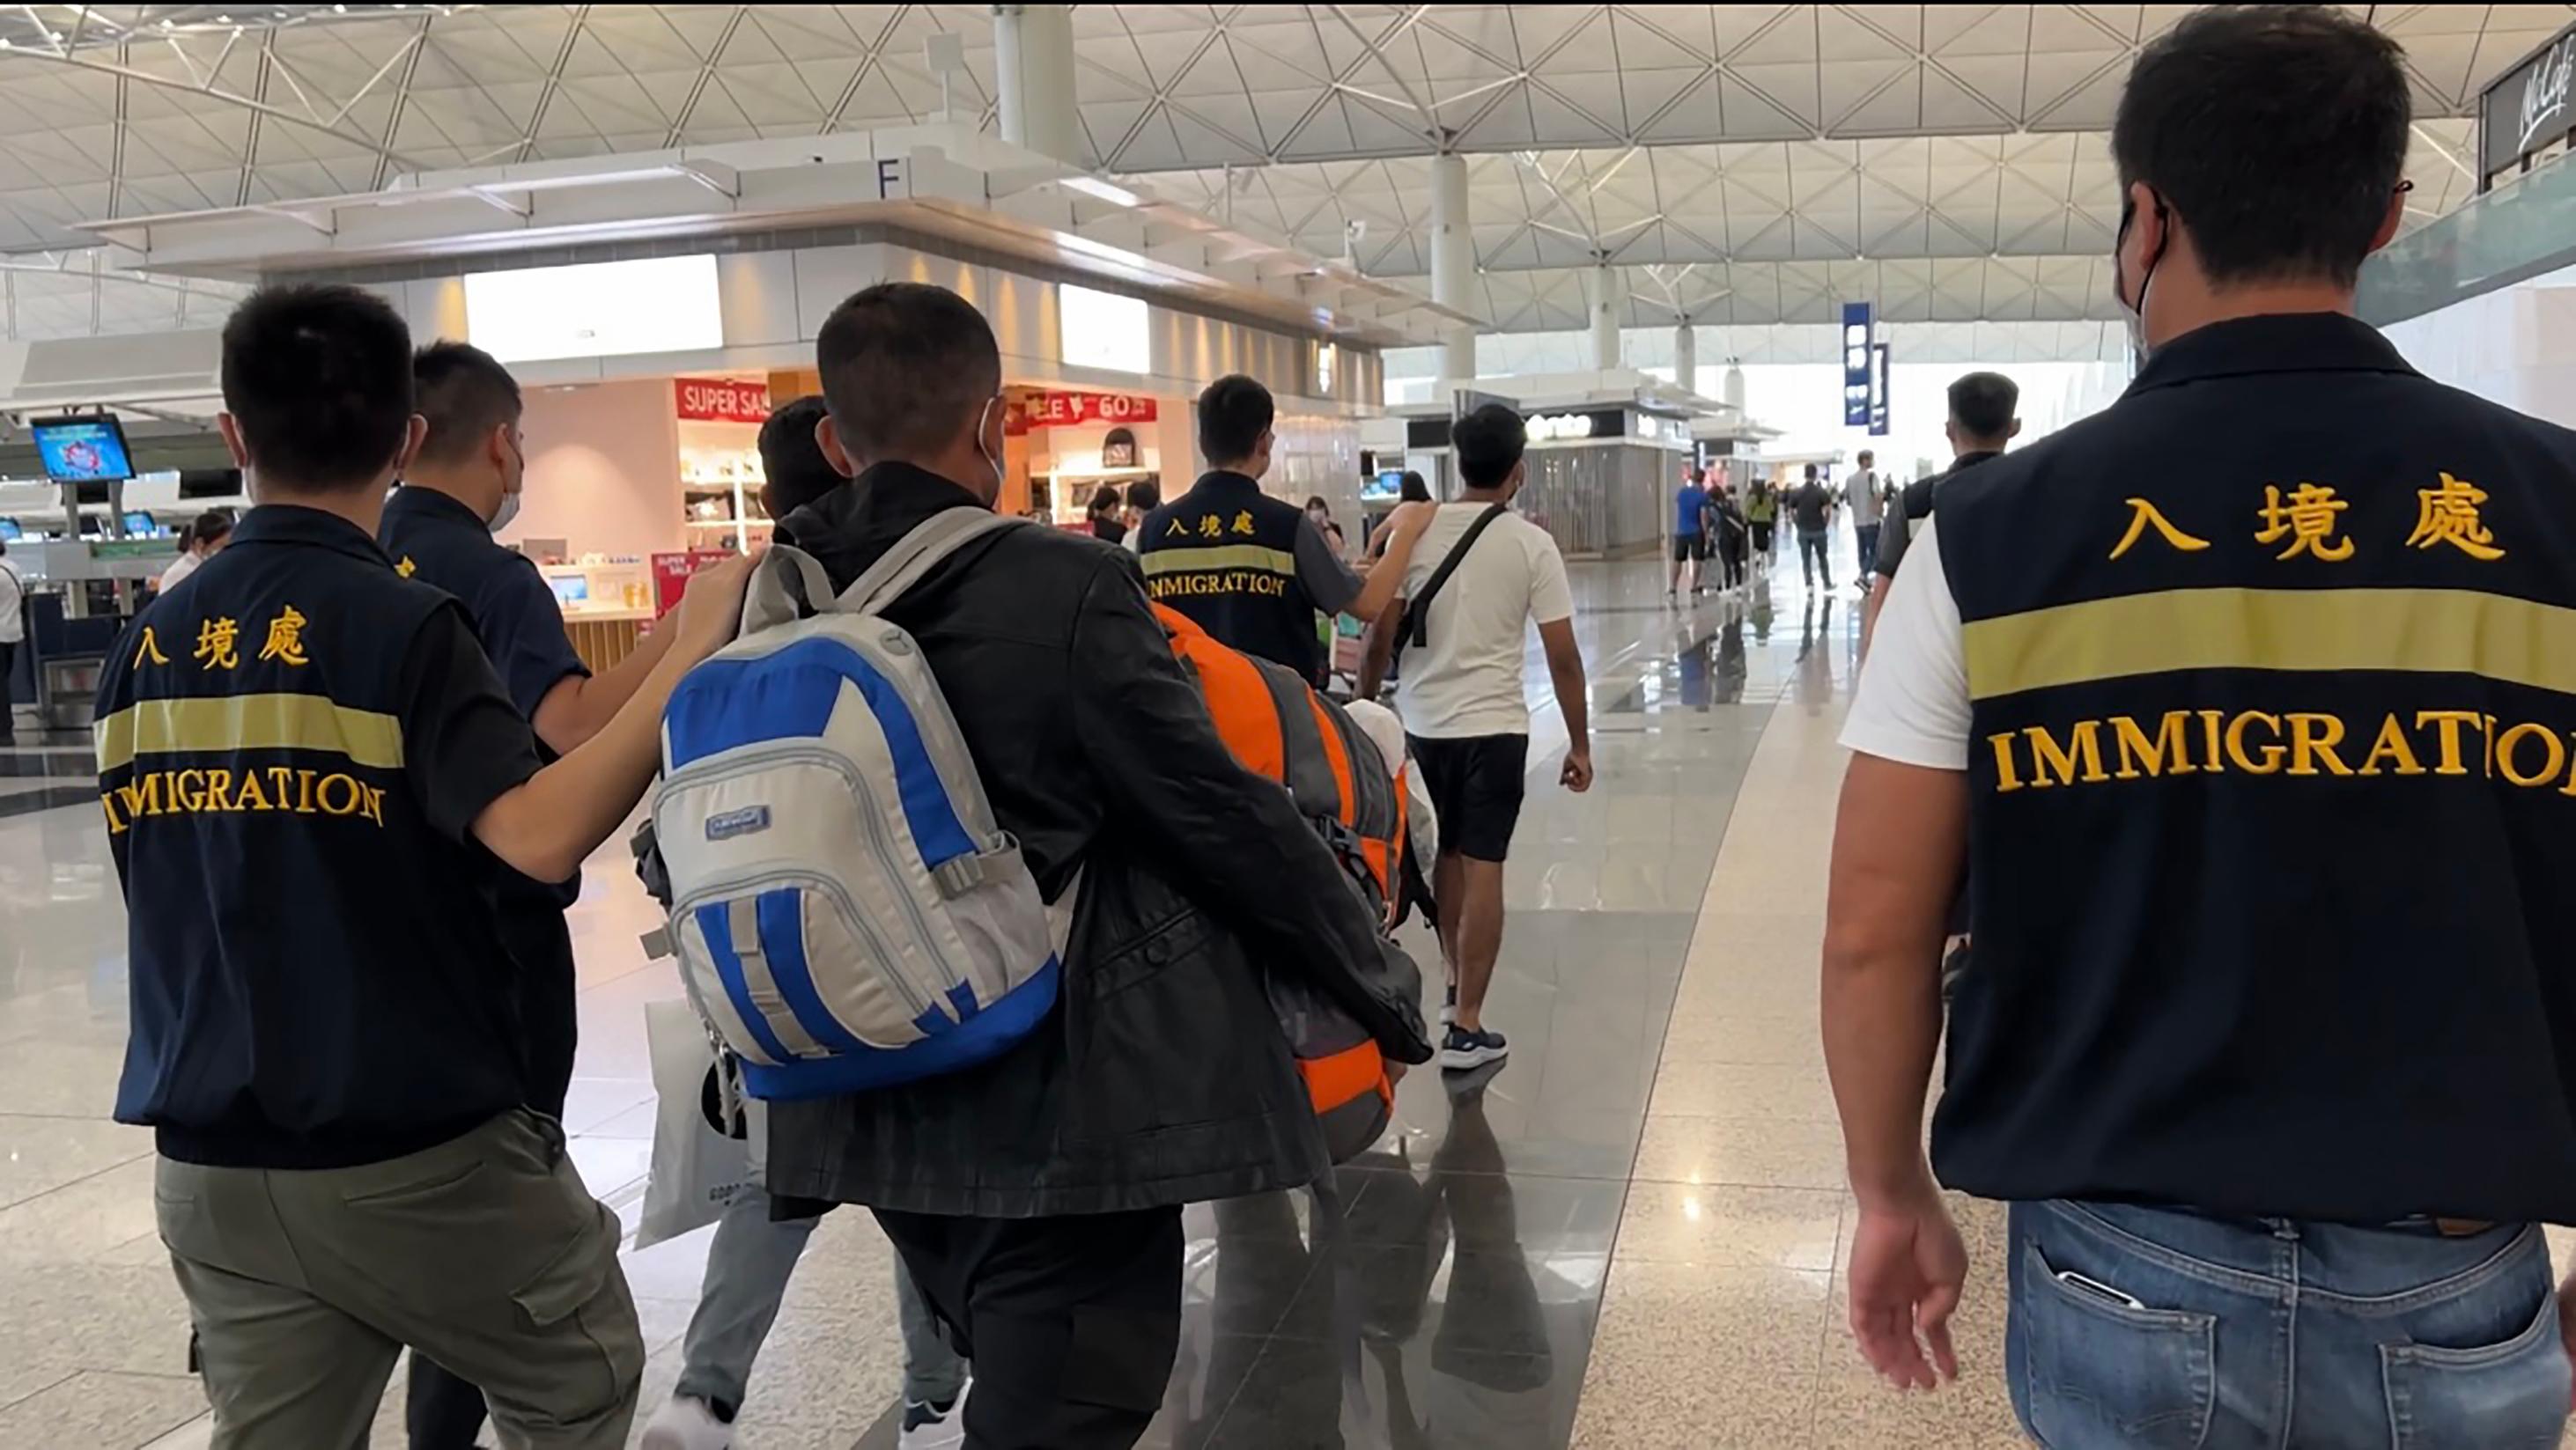 The Immigration Department (ImmD) carried out repatriation operations from September 13 to yesterday (September 20). A total of 45 unsubstantiated non-refoulement claimants were repatriated to their places of origin. Photo shows removees being escorted by ImmD officers to depart Hong Kong.